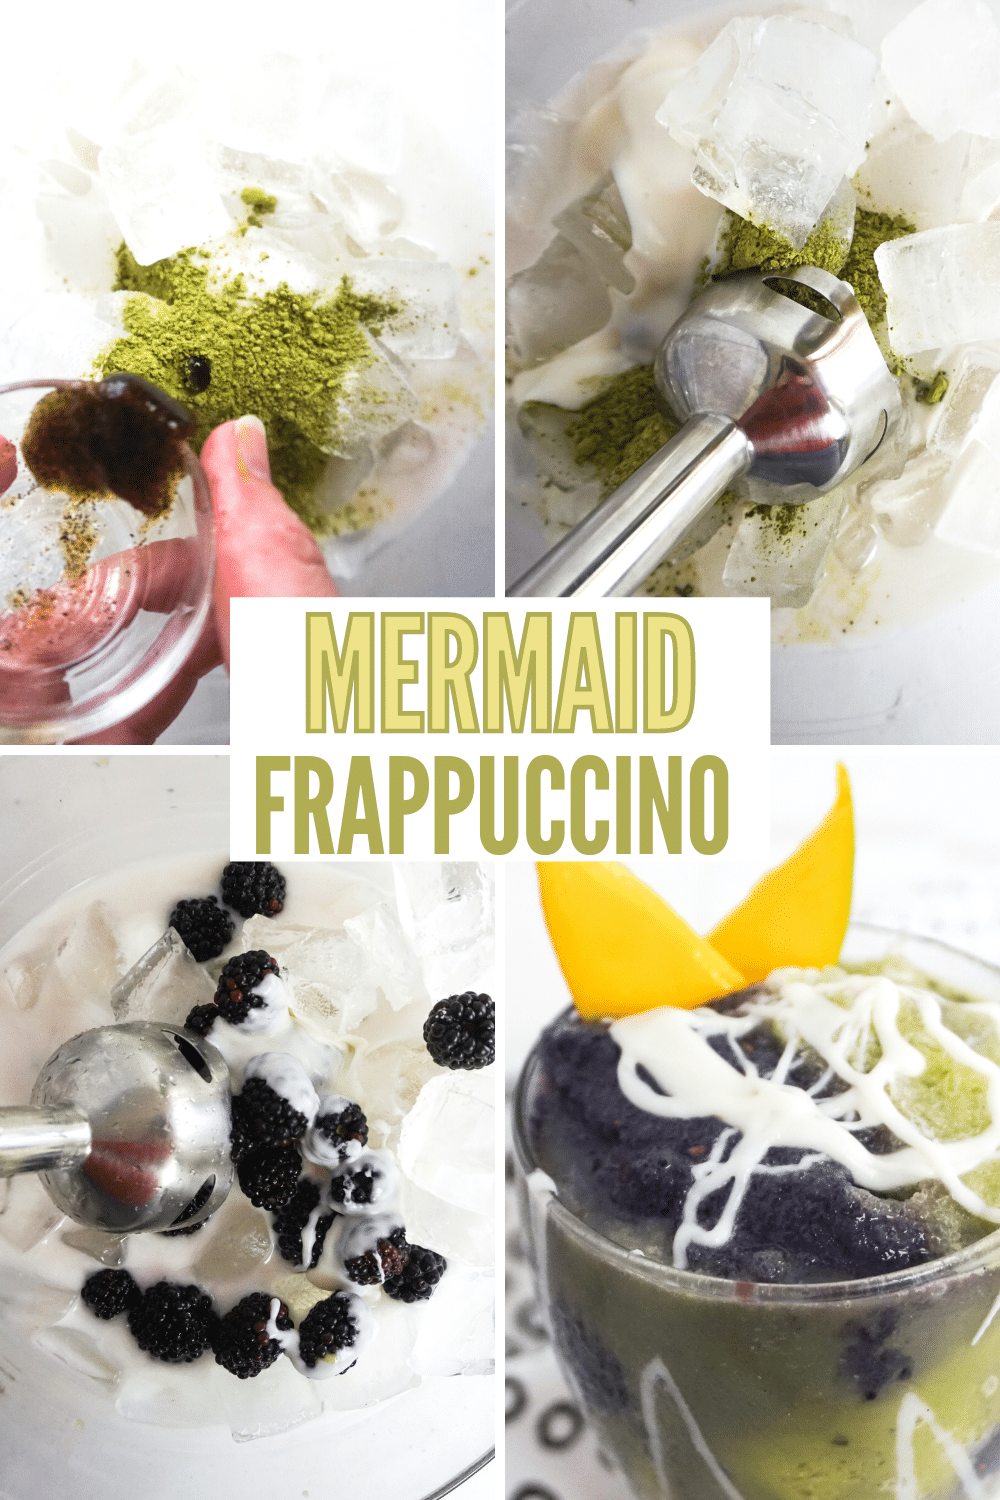 Add this mermaid frappuccino to your collection of mythical drink recipes! Super cute drink idea for birthday parties or weekend fun! #mermaidfrappuccino #mermaid #frappuccino #recipe via @wondermomwannab